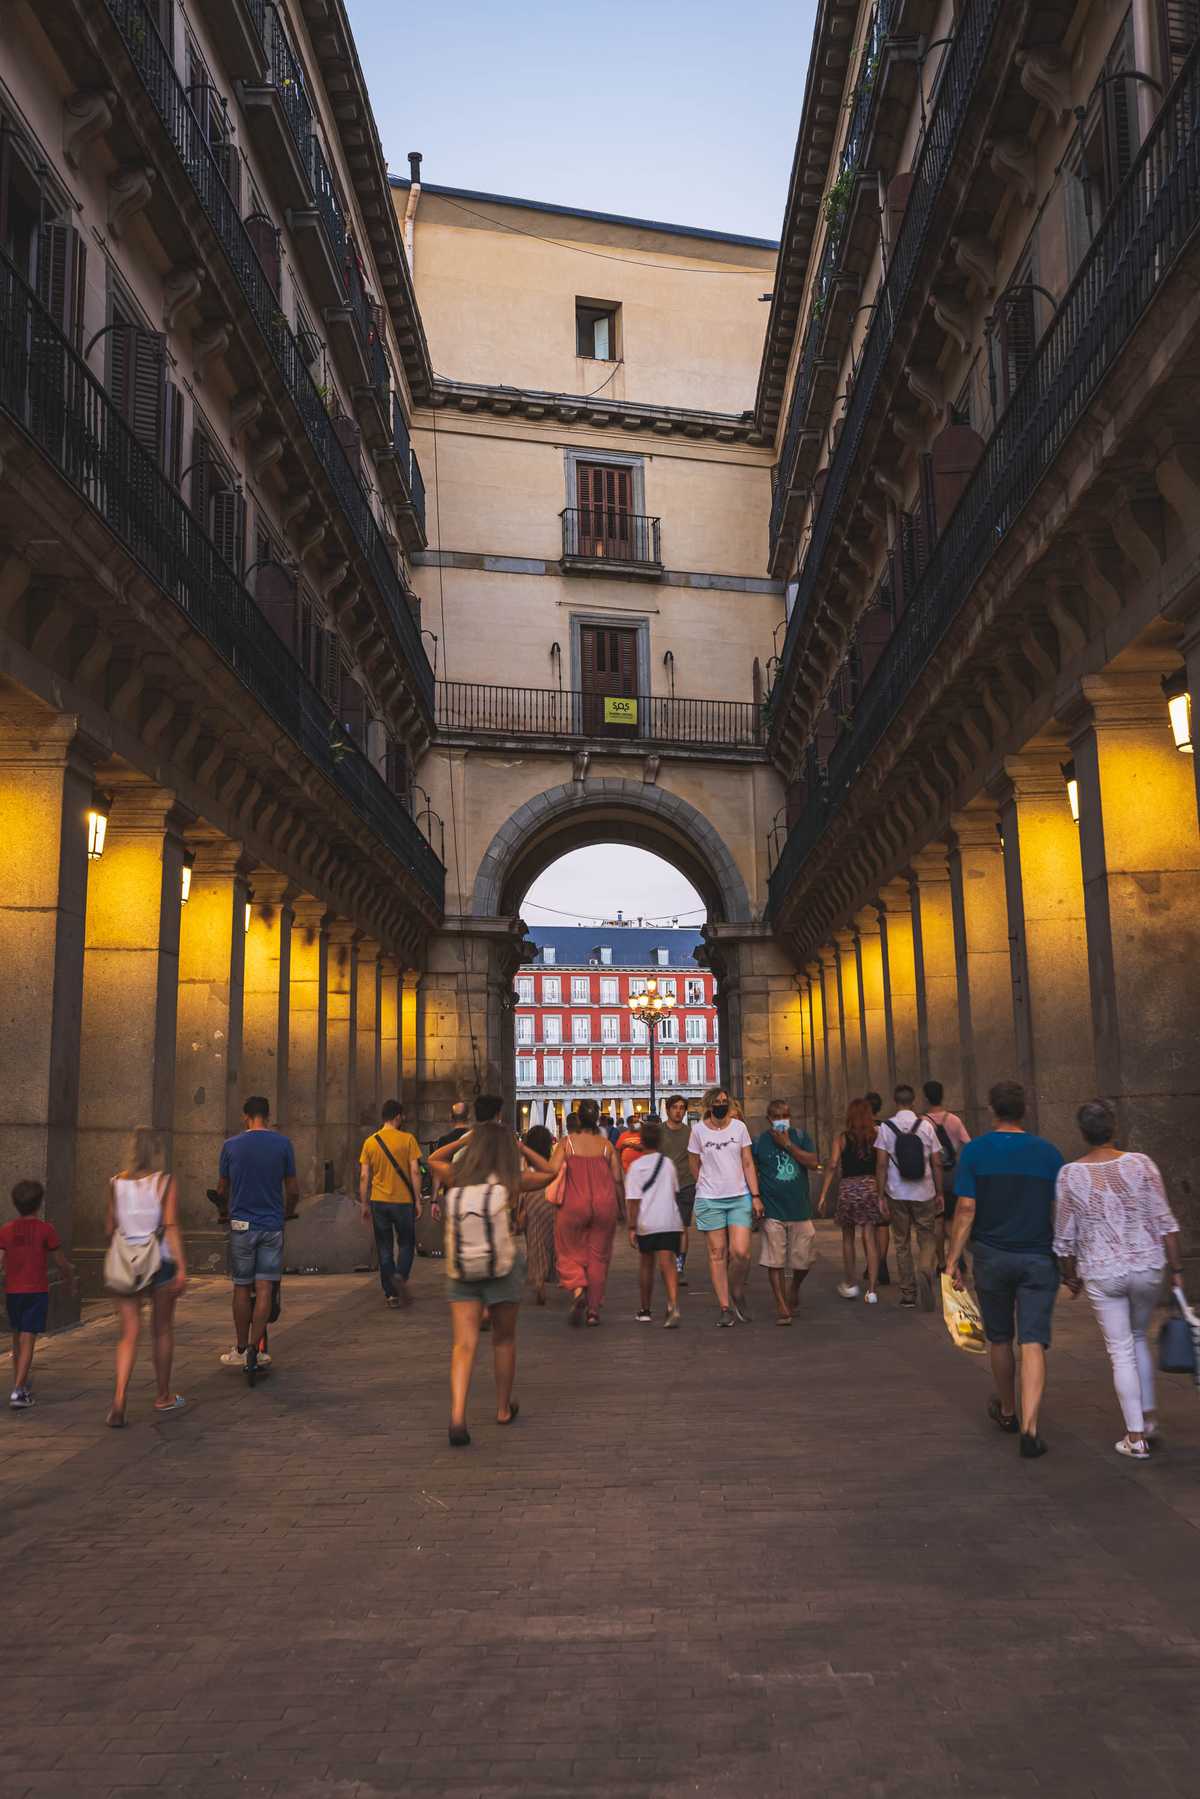 Walking through one of the open passages to Plaza Mayor in the early evening with people out enjoying their lives in the city